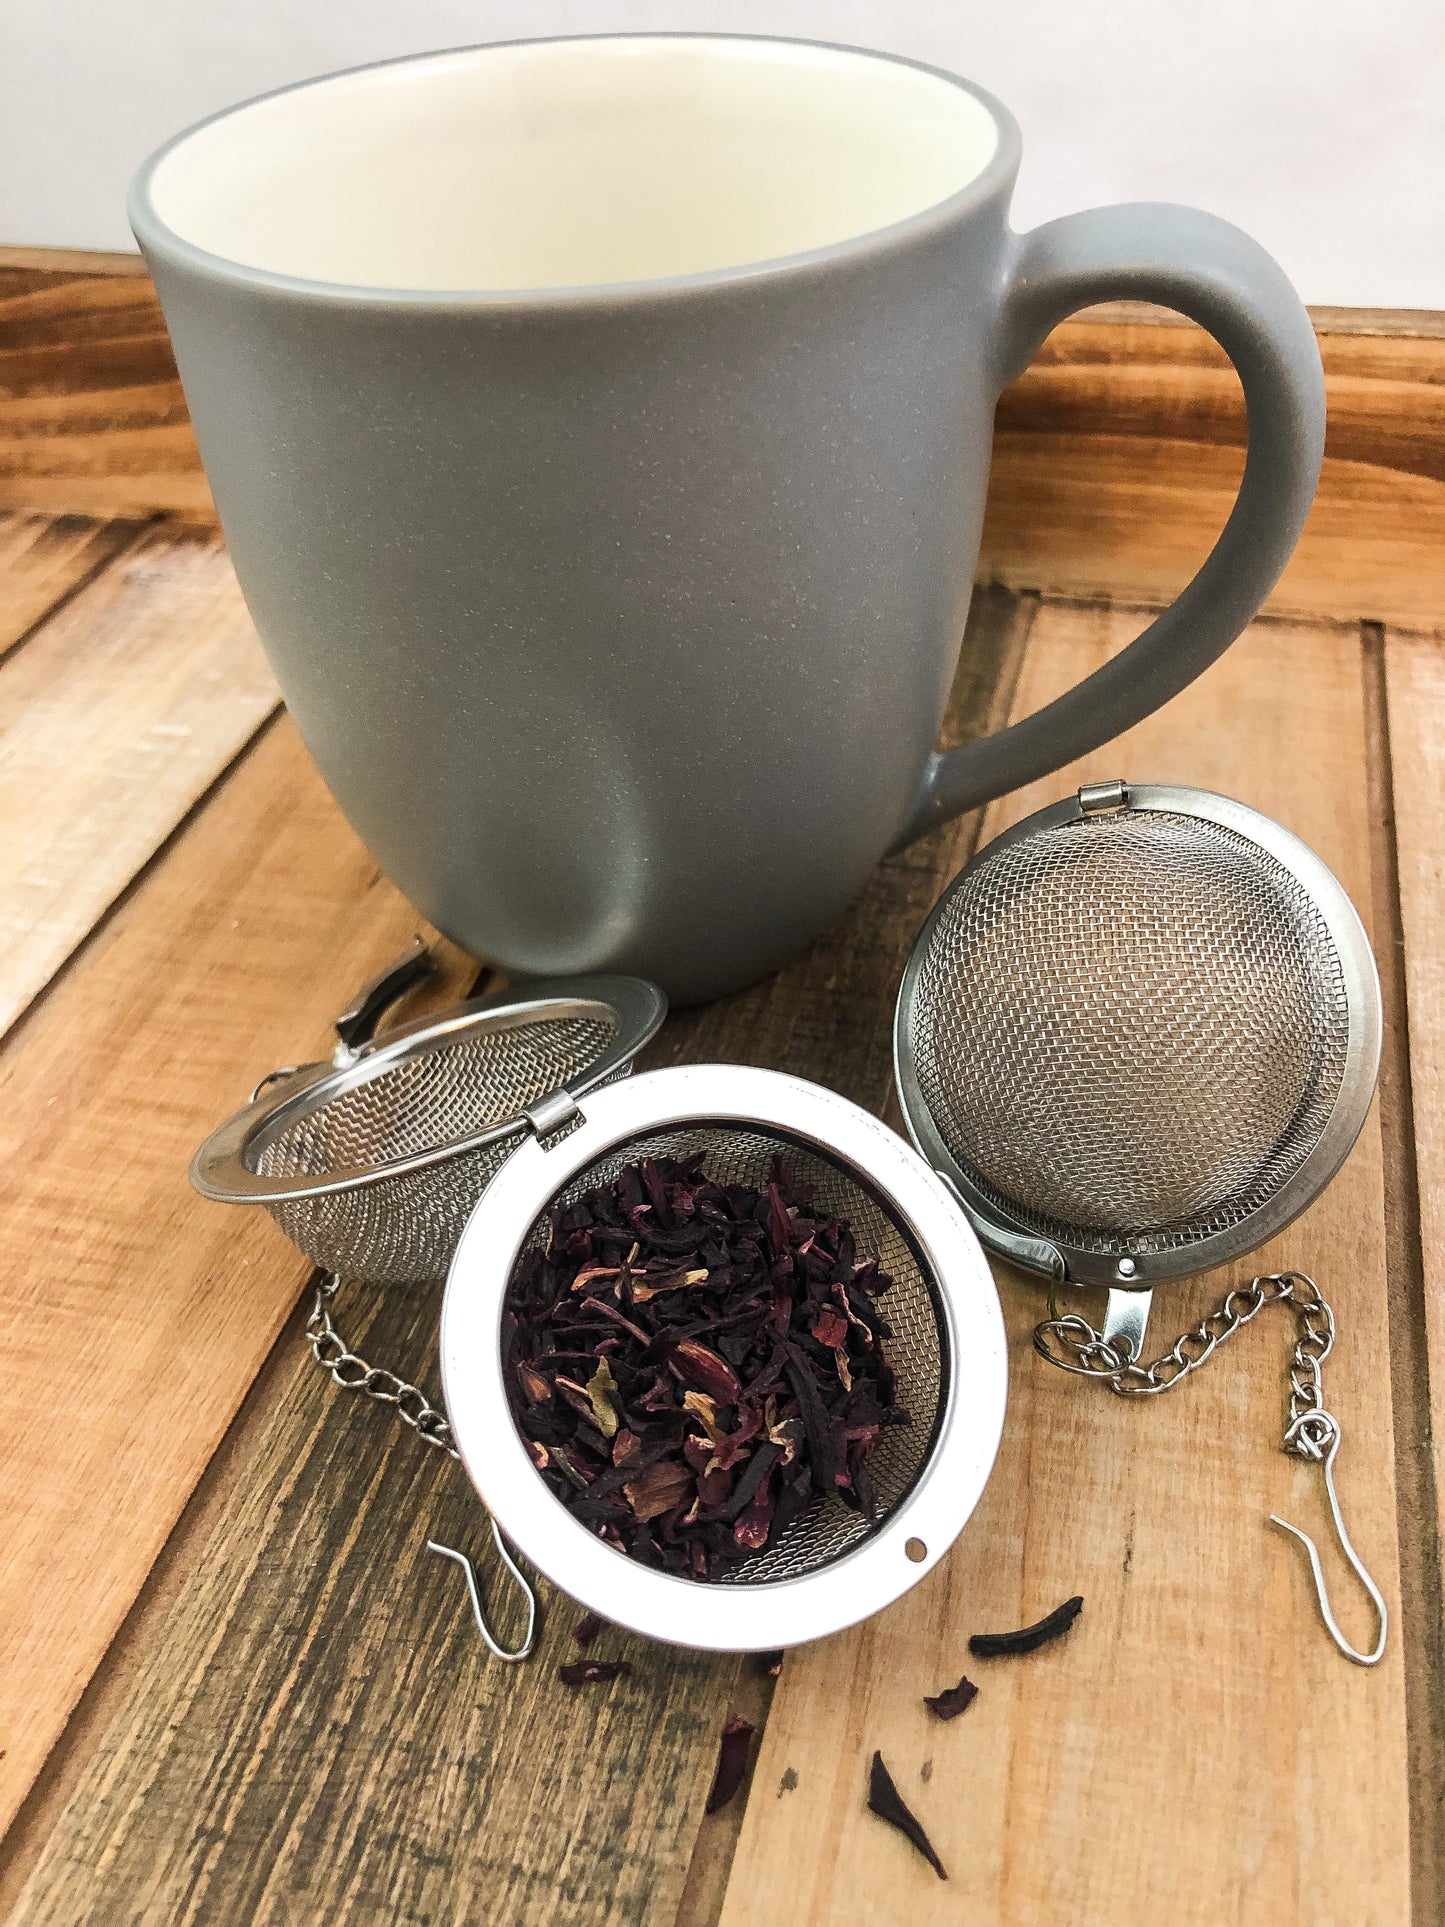 dried hibiscus in a mesh tea infuse next to a grey coffee mug on a wooden table with a white background